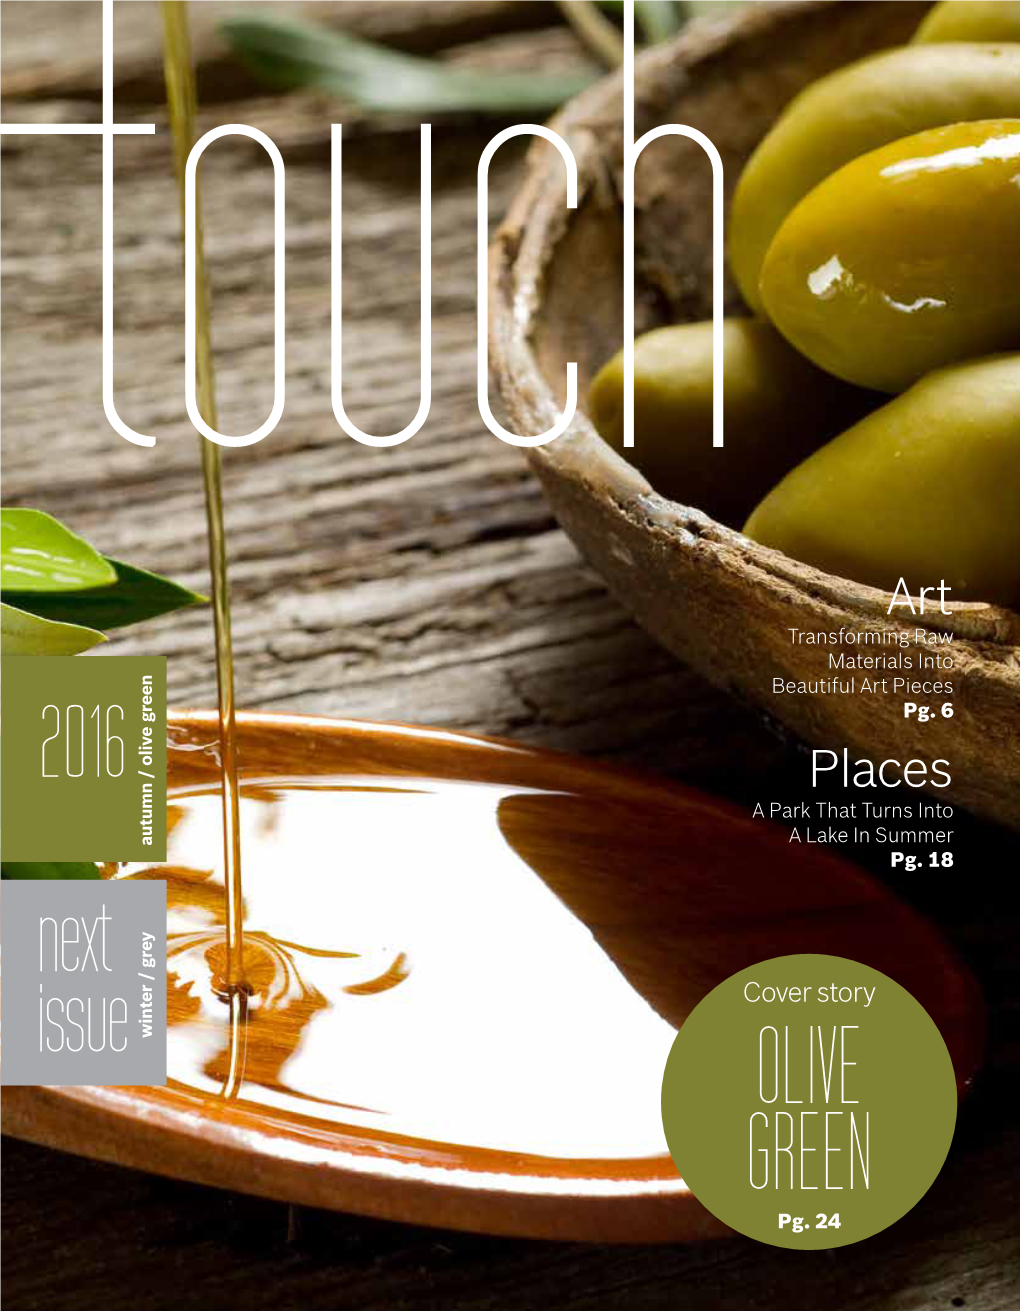 Olive Green Cover Story GREEN a Park Thatturns Into OLIVE Beautiful Art Pieces Beautiful Art Pg